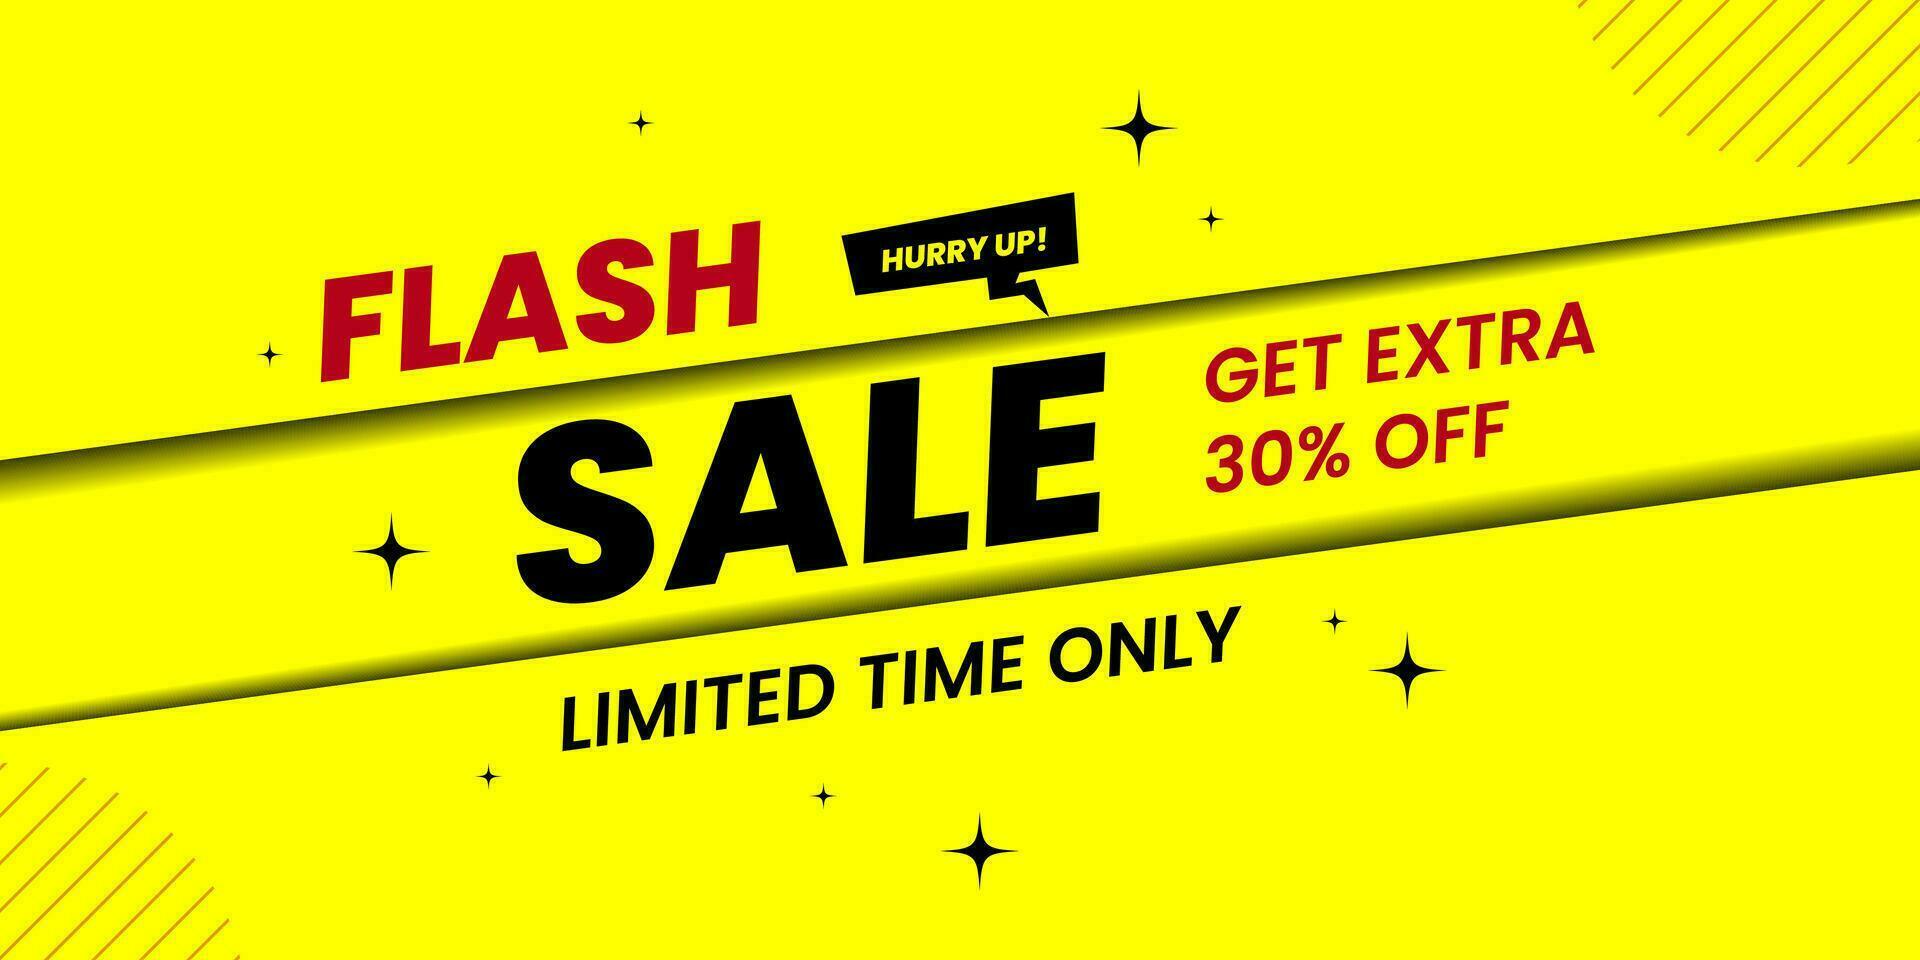 Flash sale promotion special offer limited in time. Sale banner with 30 percent off. Get extra discount invitation. Commercial poster, coupon or voucher vector illustration